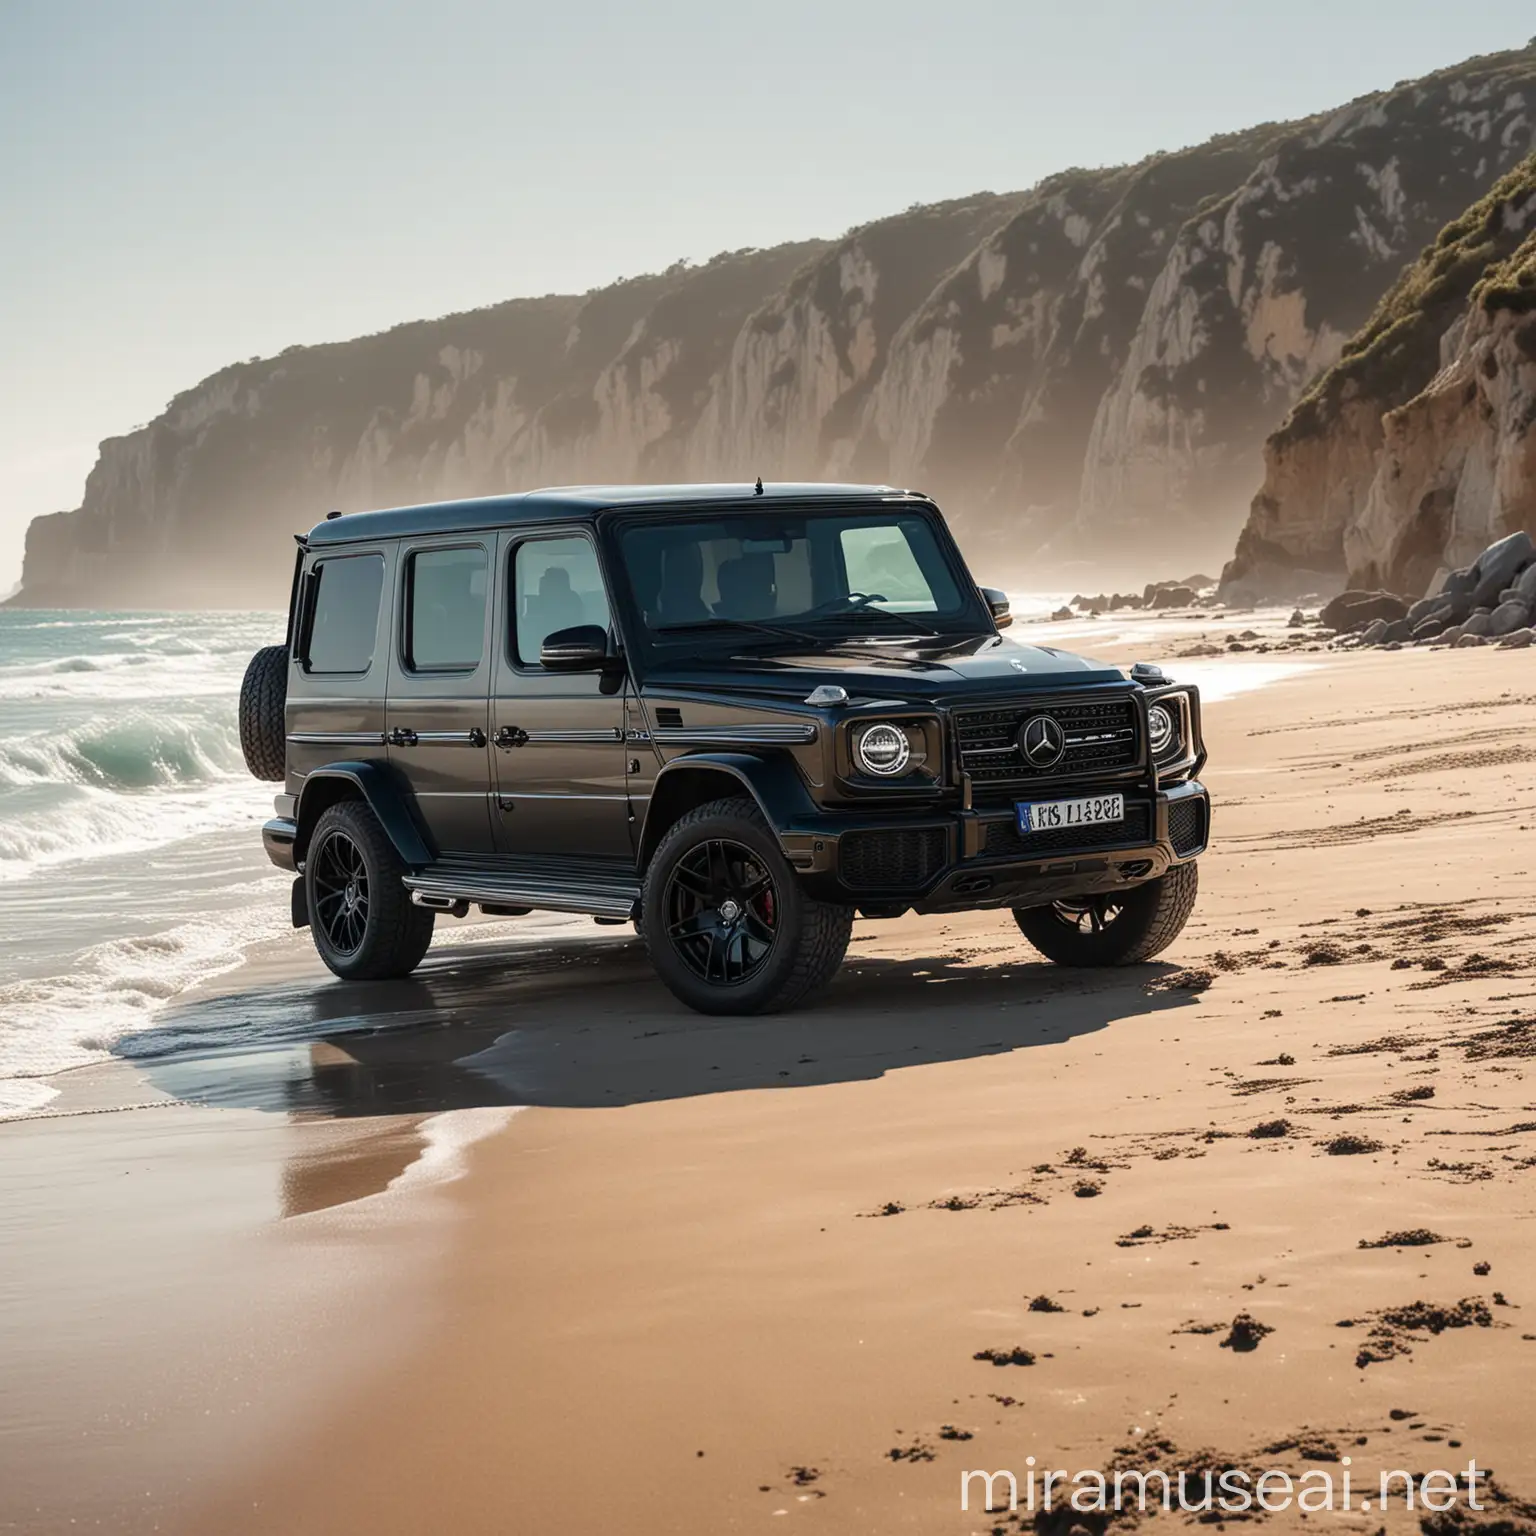 black mercedes AMG G-wagon model parked on a beach near a beautiful sea during a sunny day